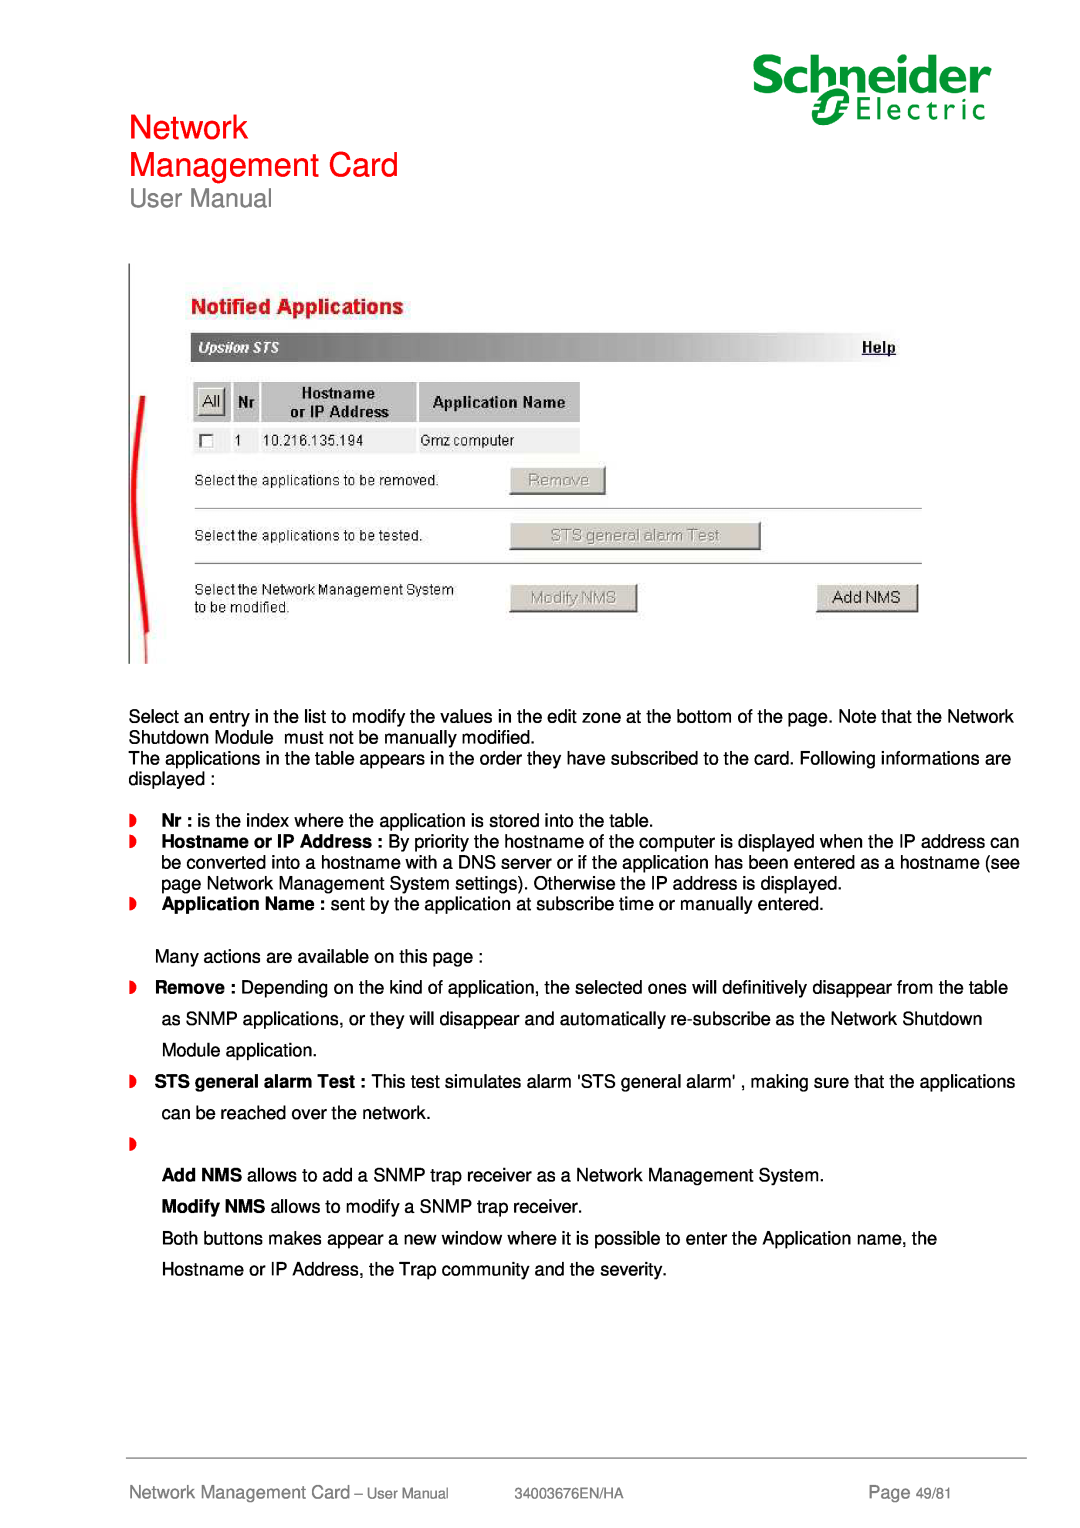 Schneider Electric 66074, 66846 user manual Network Management Card - User Manual, Page 49/81 